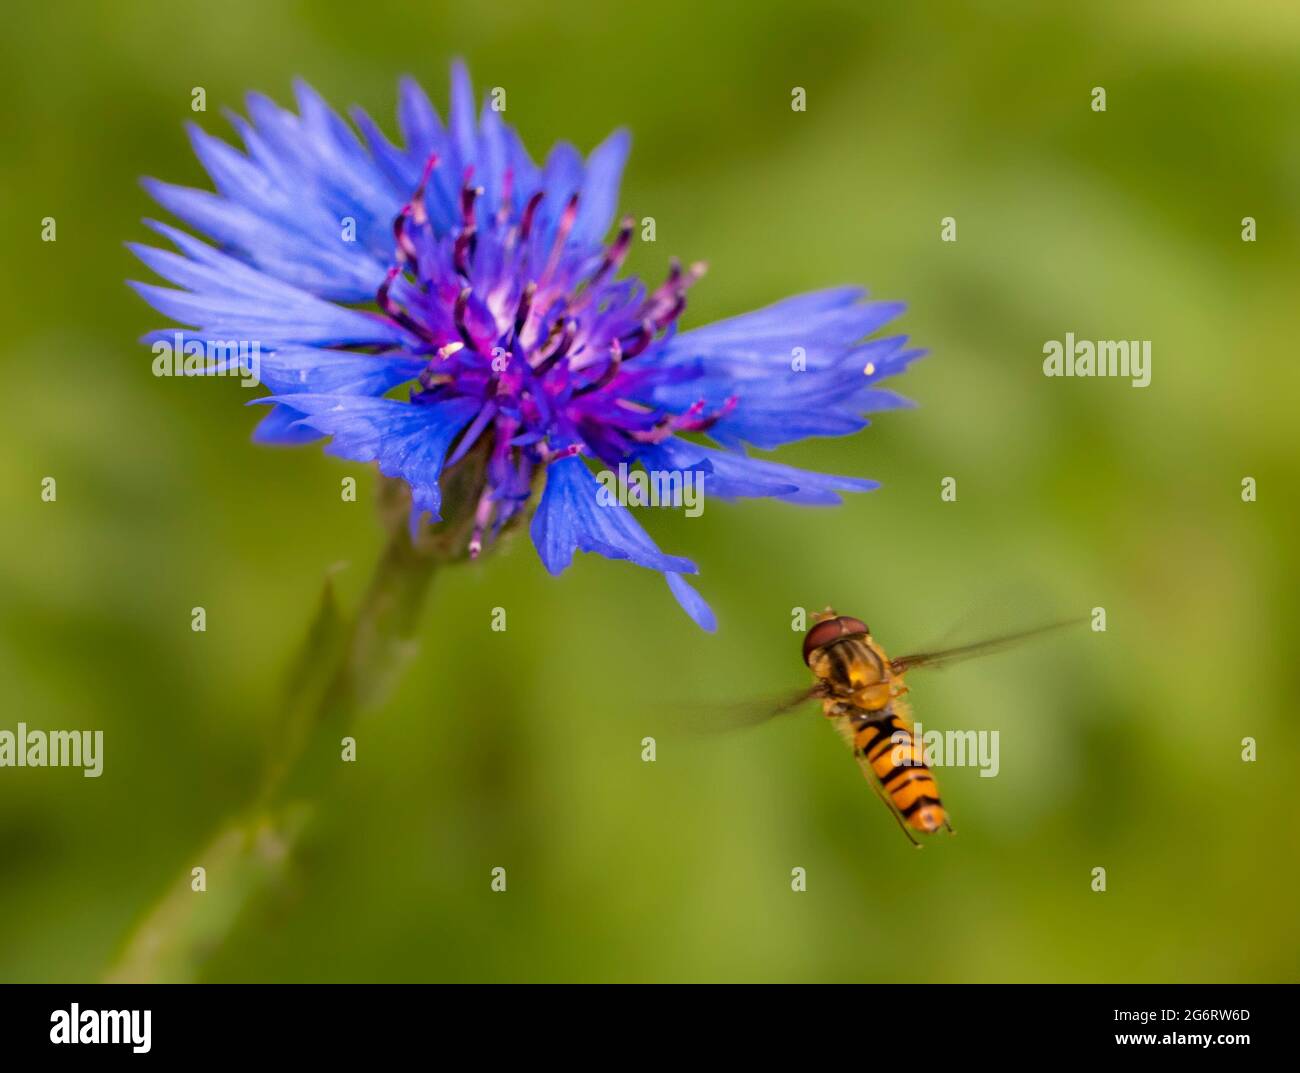 Hoverflies, syrphid flies, Hover Fly, on cornflowers, Bedfordshire, UK Stock Photo